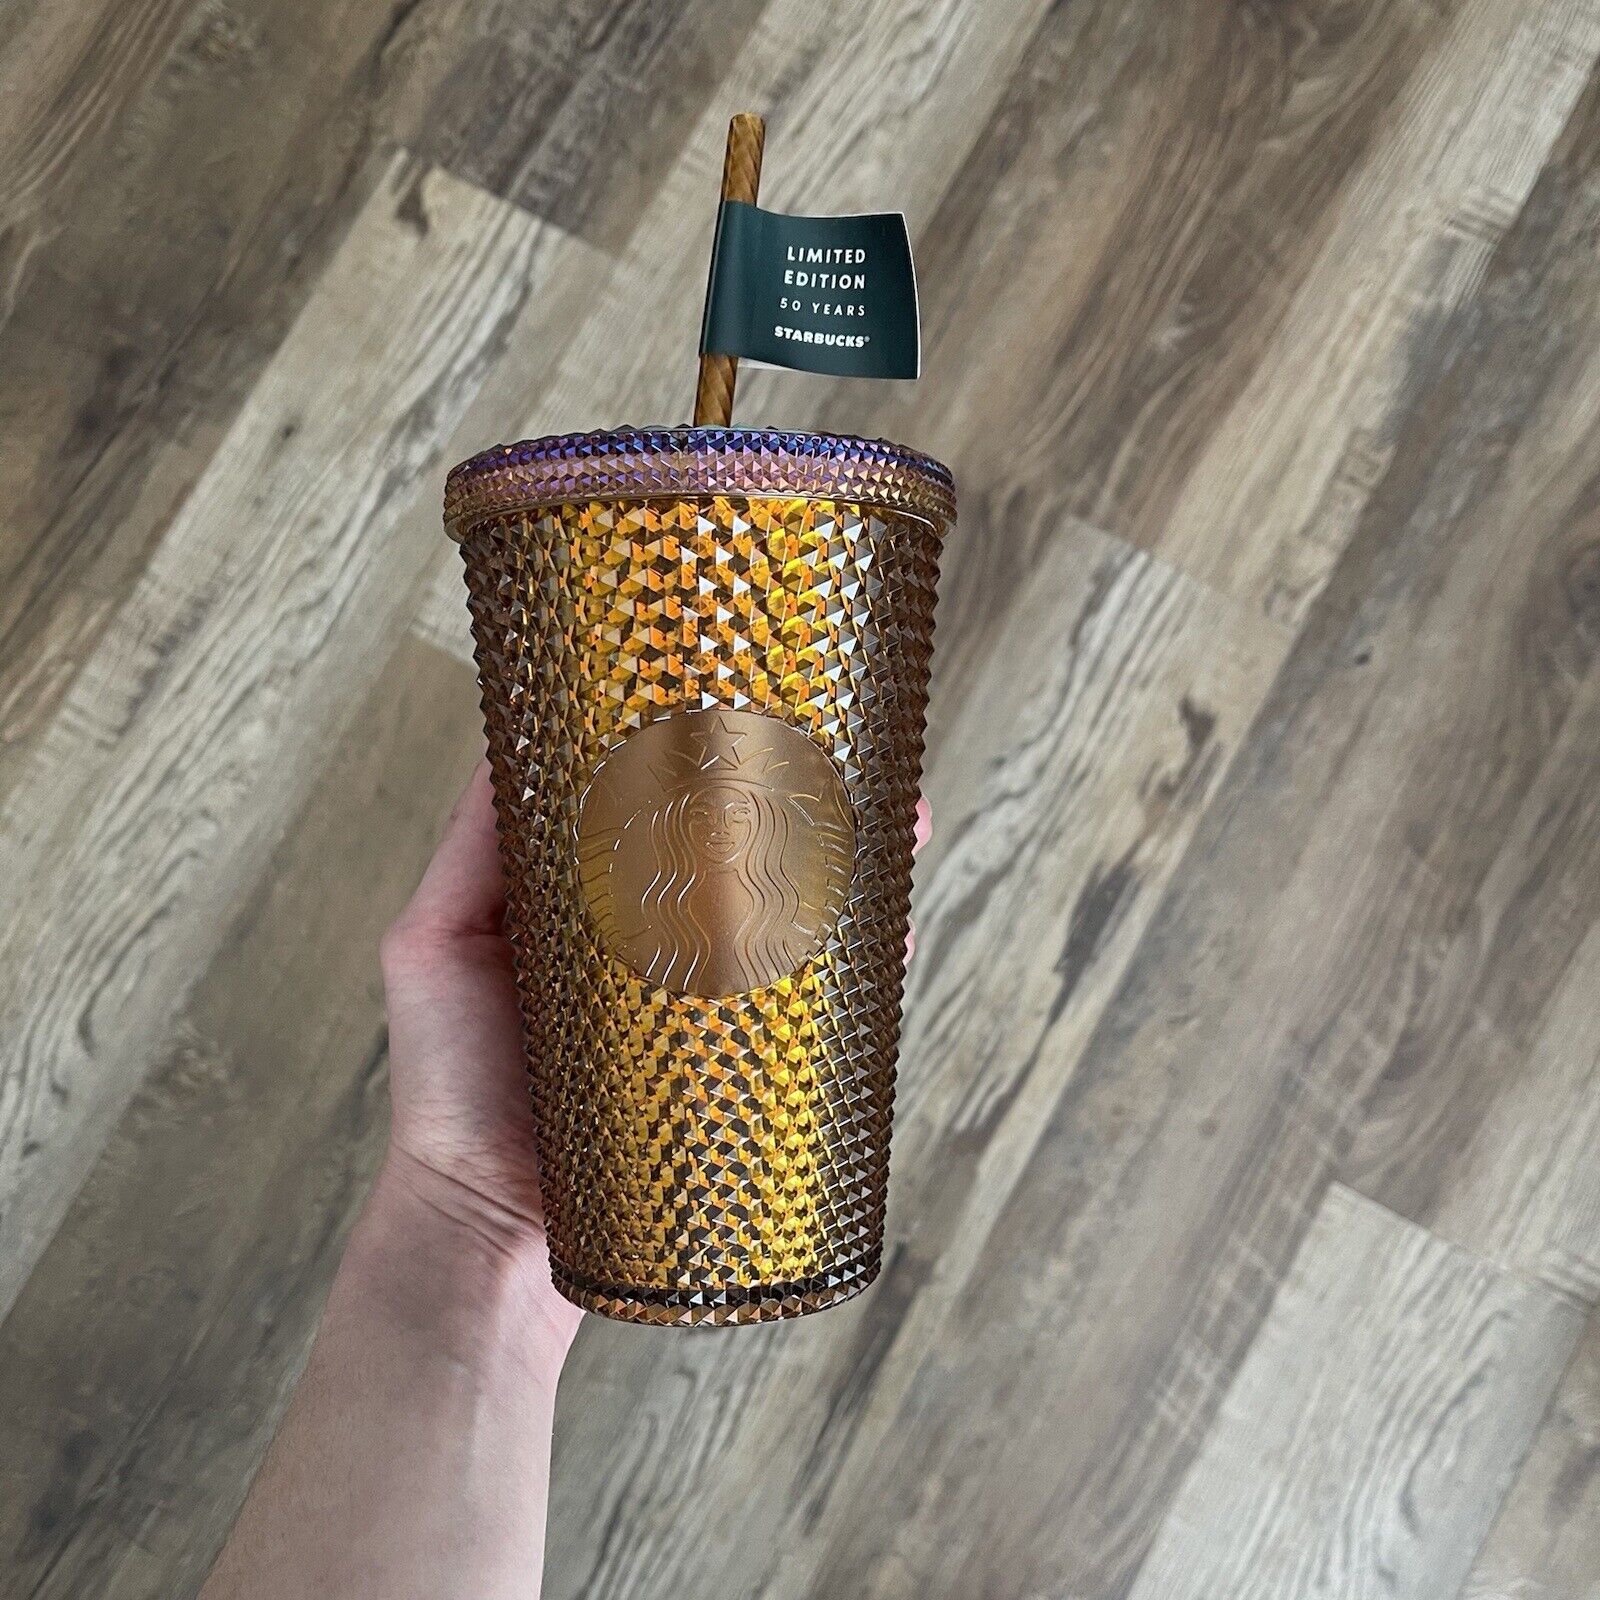 Starbucks 50th Anniversary Gold Copper Honeycomb Studded Tumbler Grande 16oz Cup